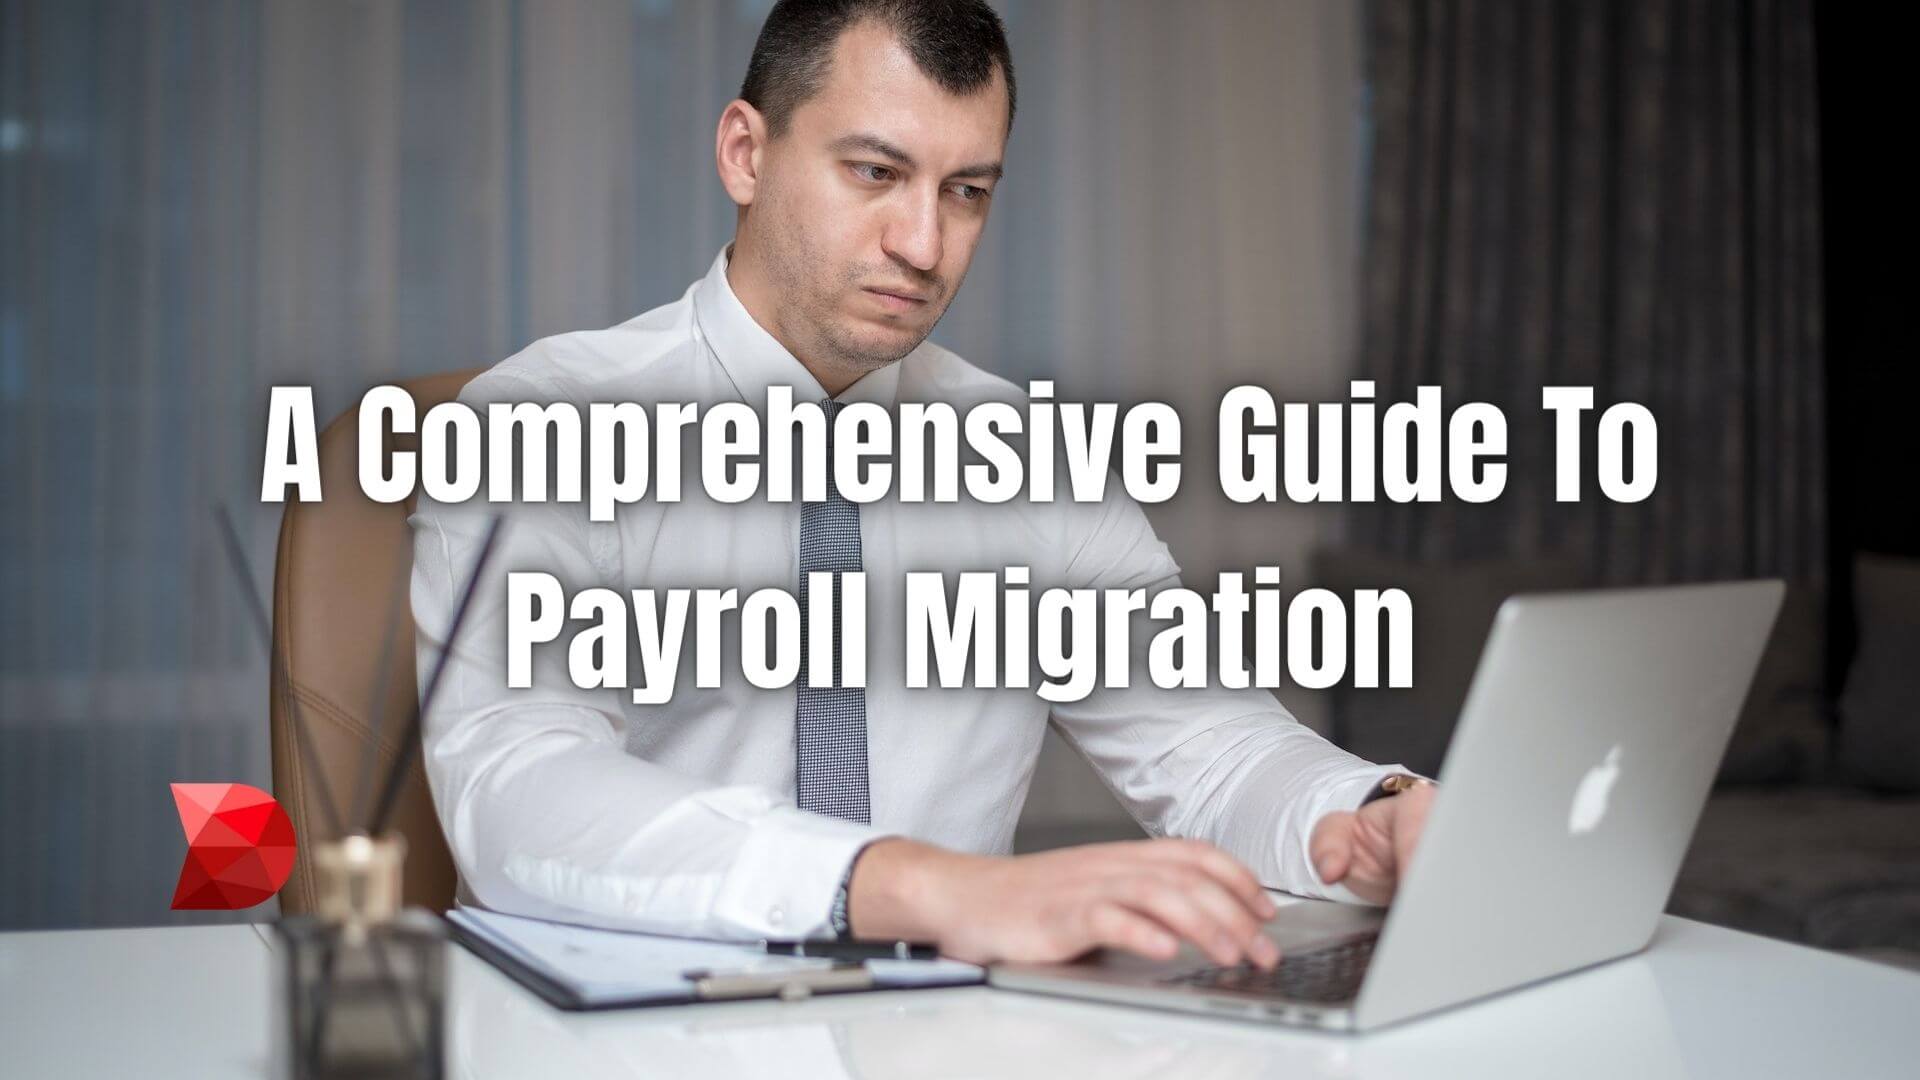 Payroll migration is the course of action a company takes to switch from its current payroll system to a new one. Click here to learn more!